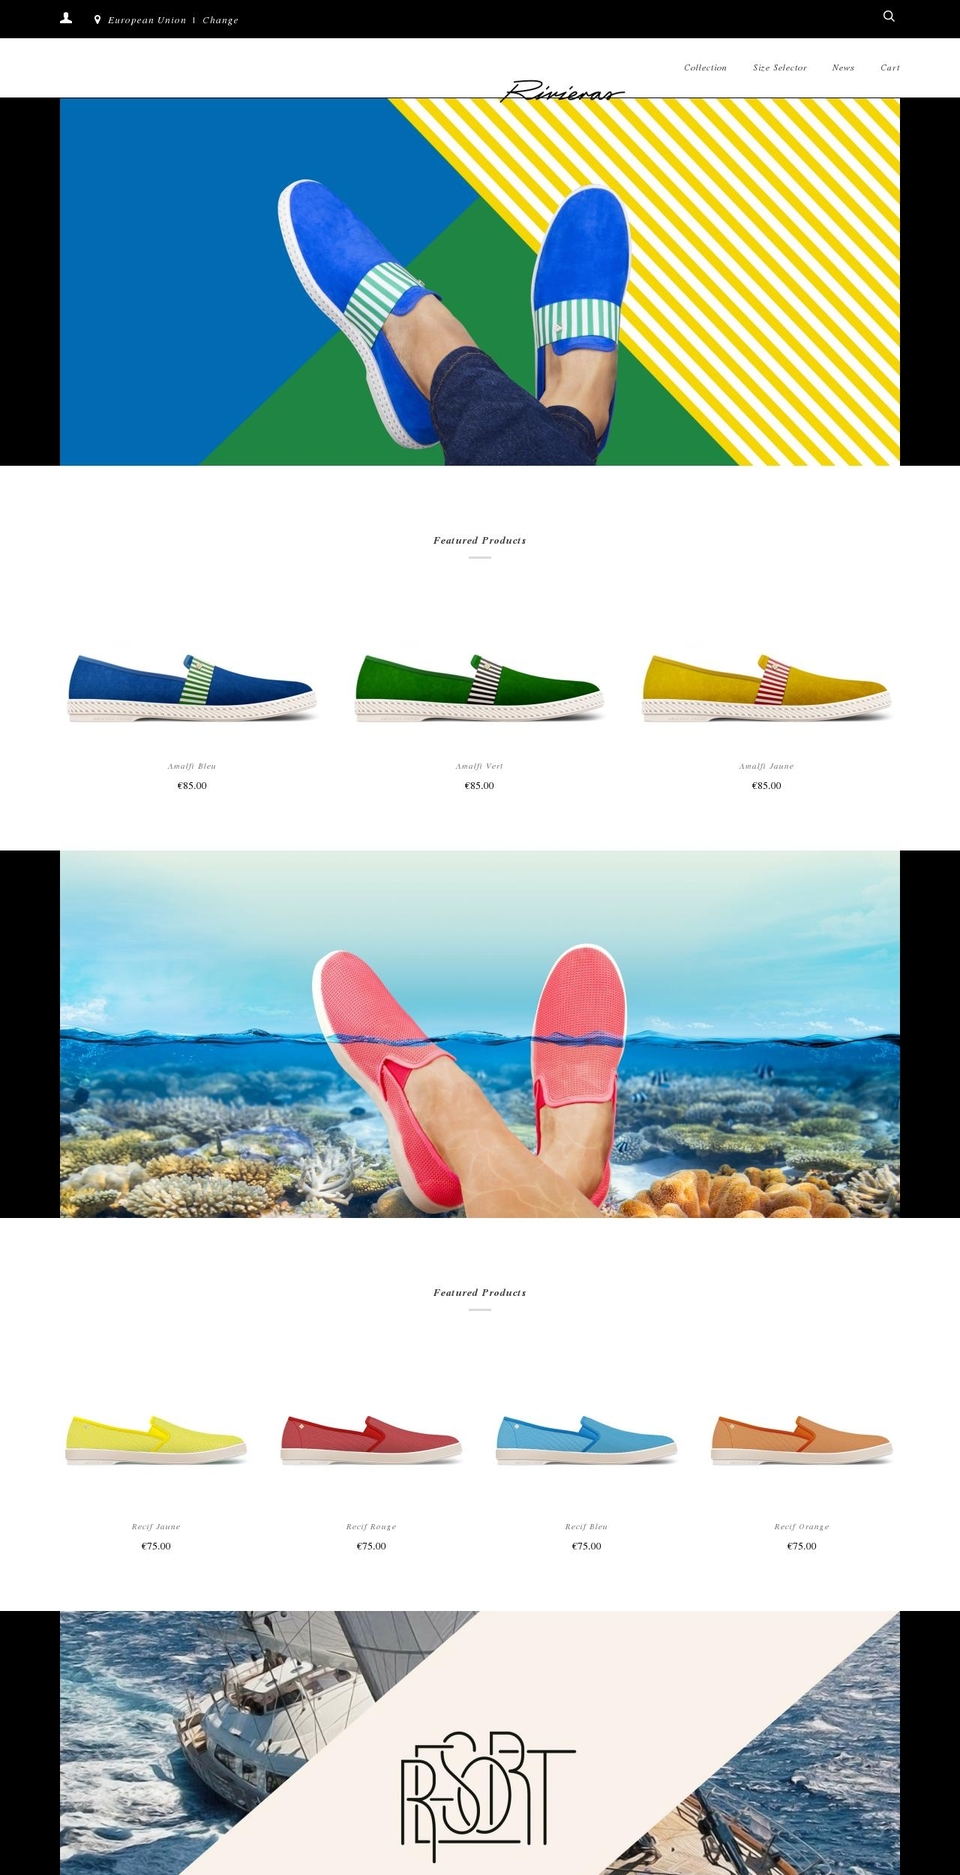 Rivieras [Plus]-TH-July-30-2018 Shopify theme site example rivieras-shoes.se